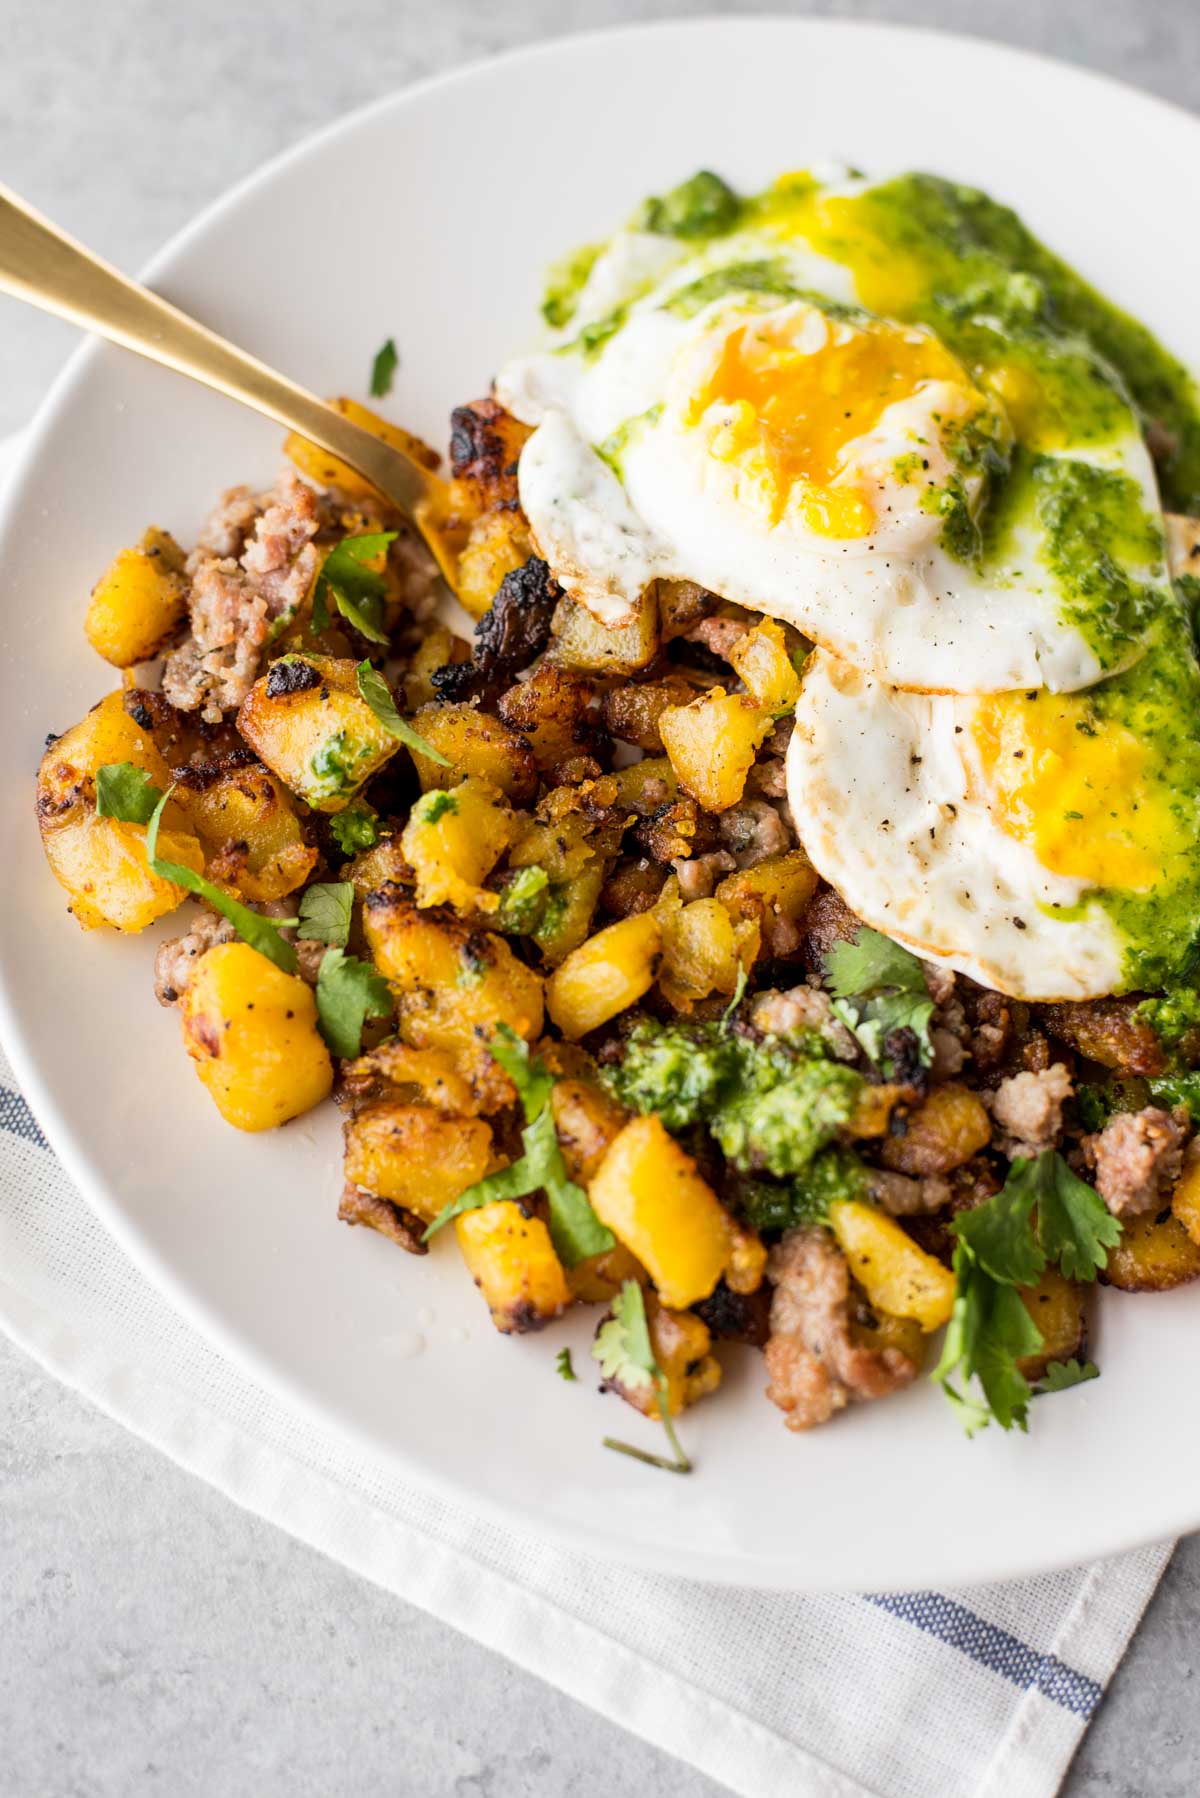 This quick and easy breakfast hash is paleo compliant and made in 10 minutes.